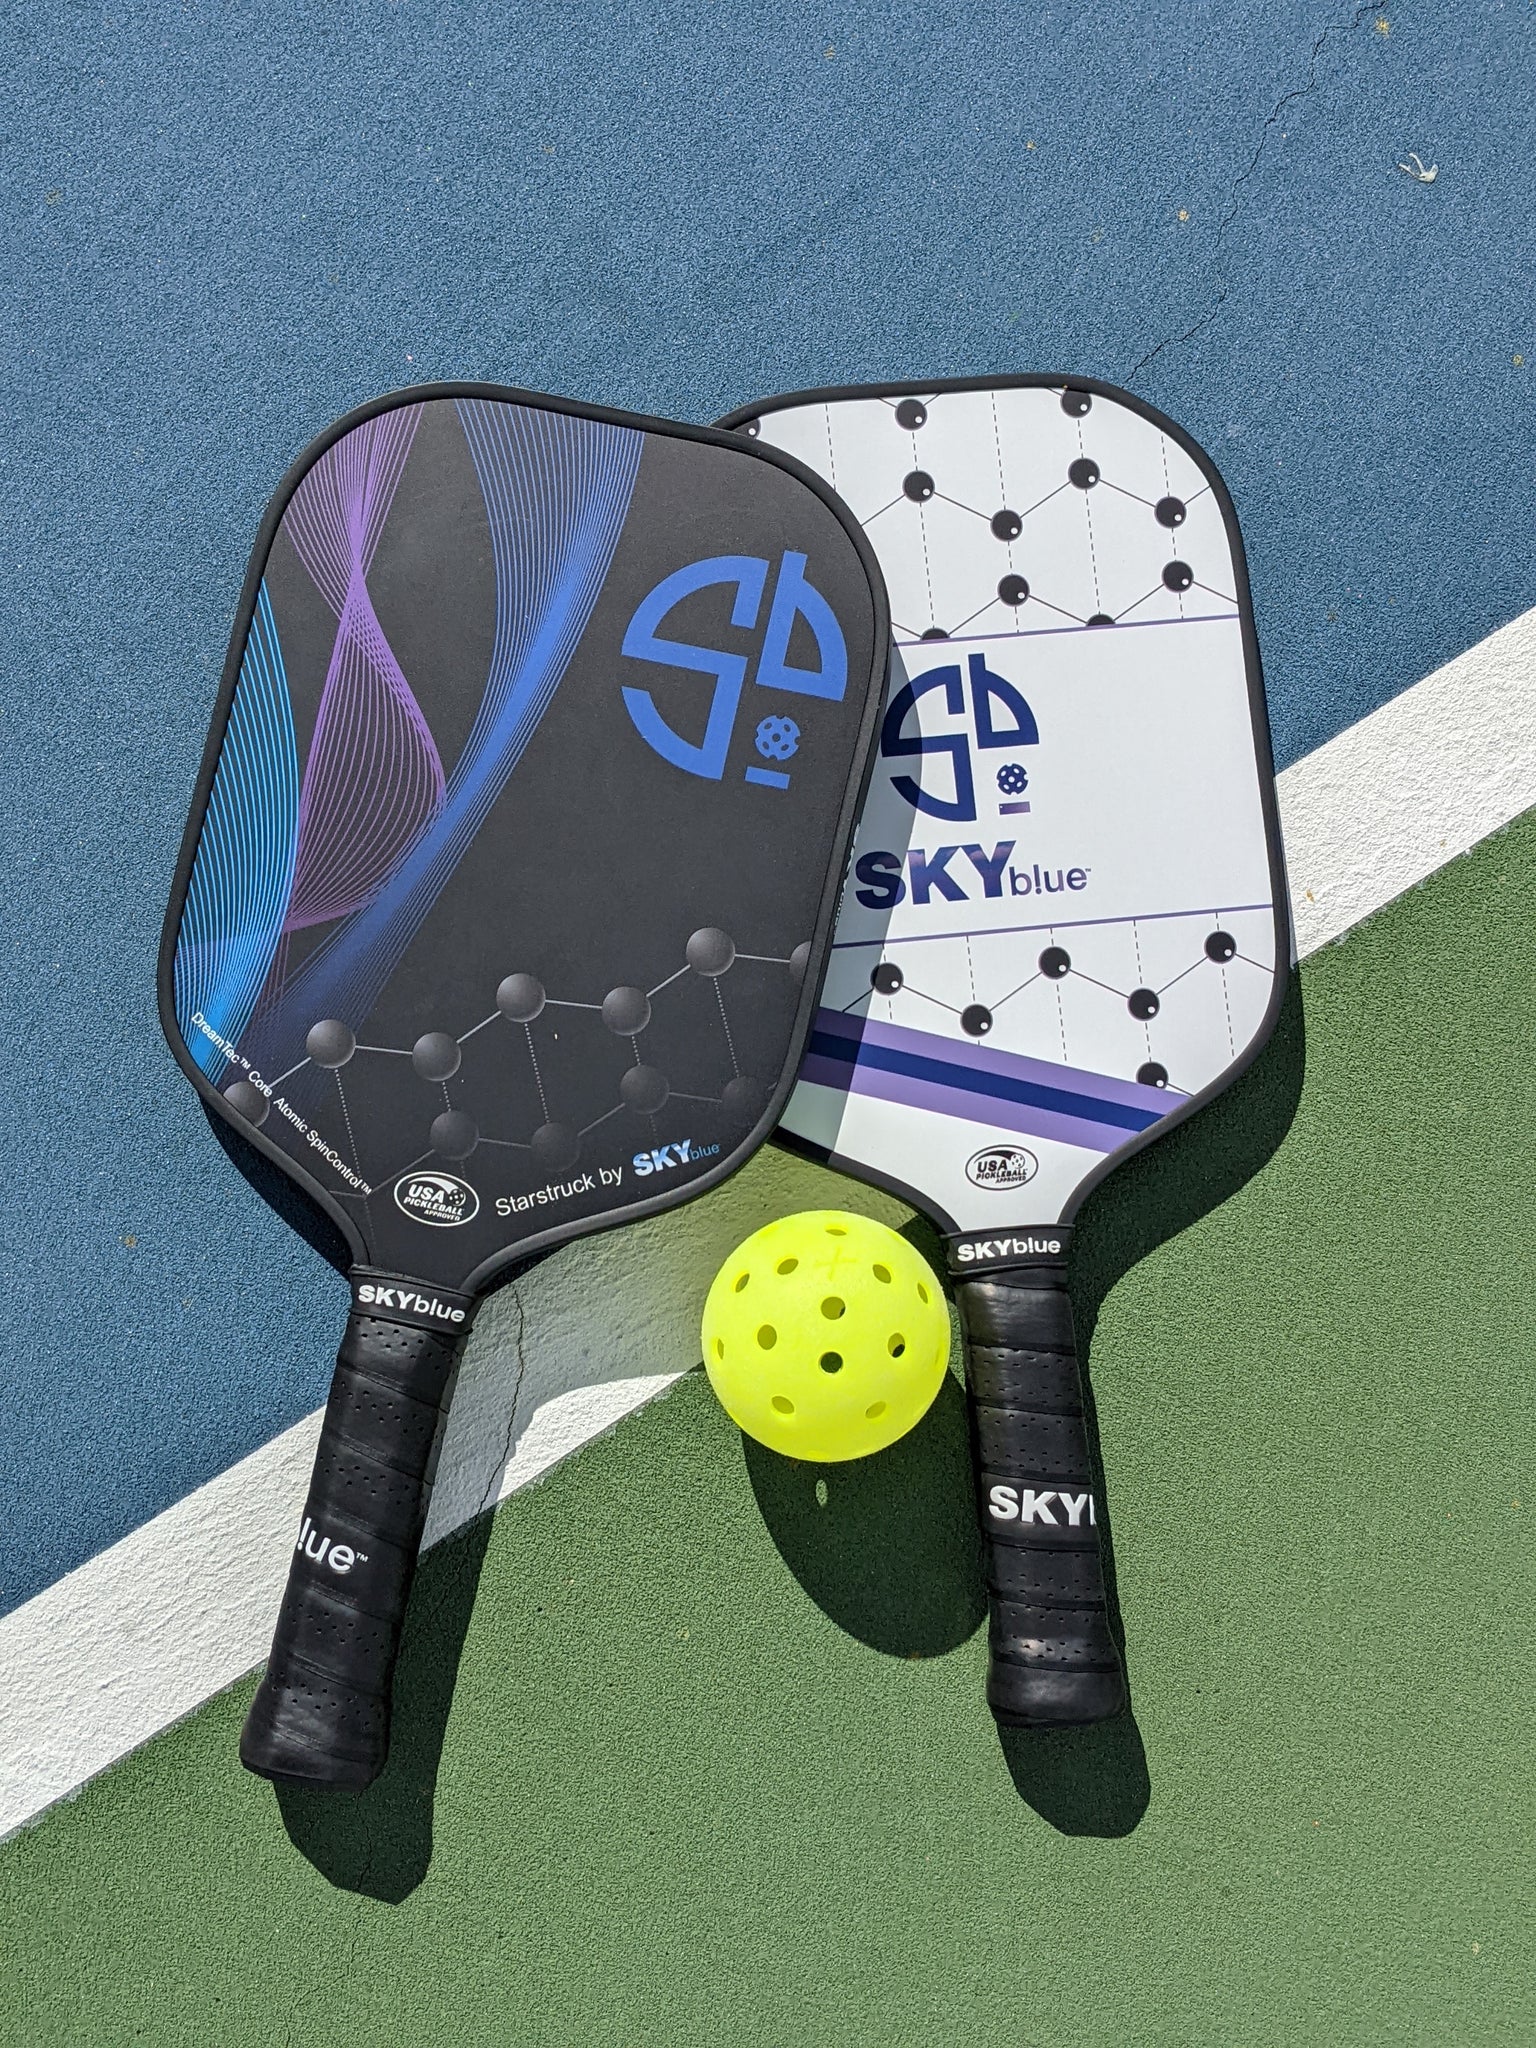 What are the 3 main benefits of Carbon Fiber in a pickleball paddle face?